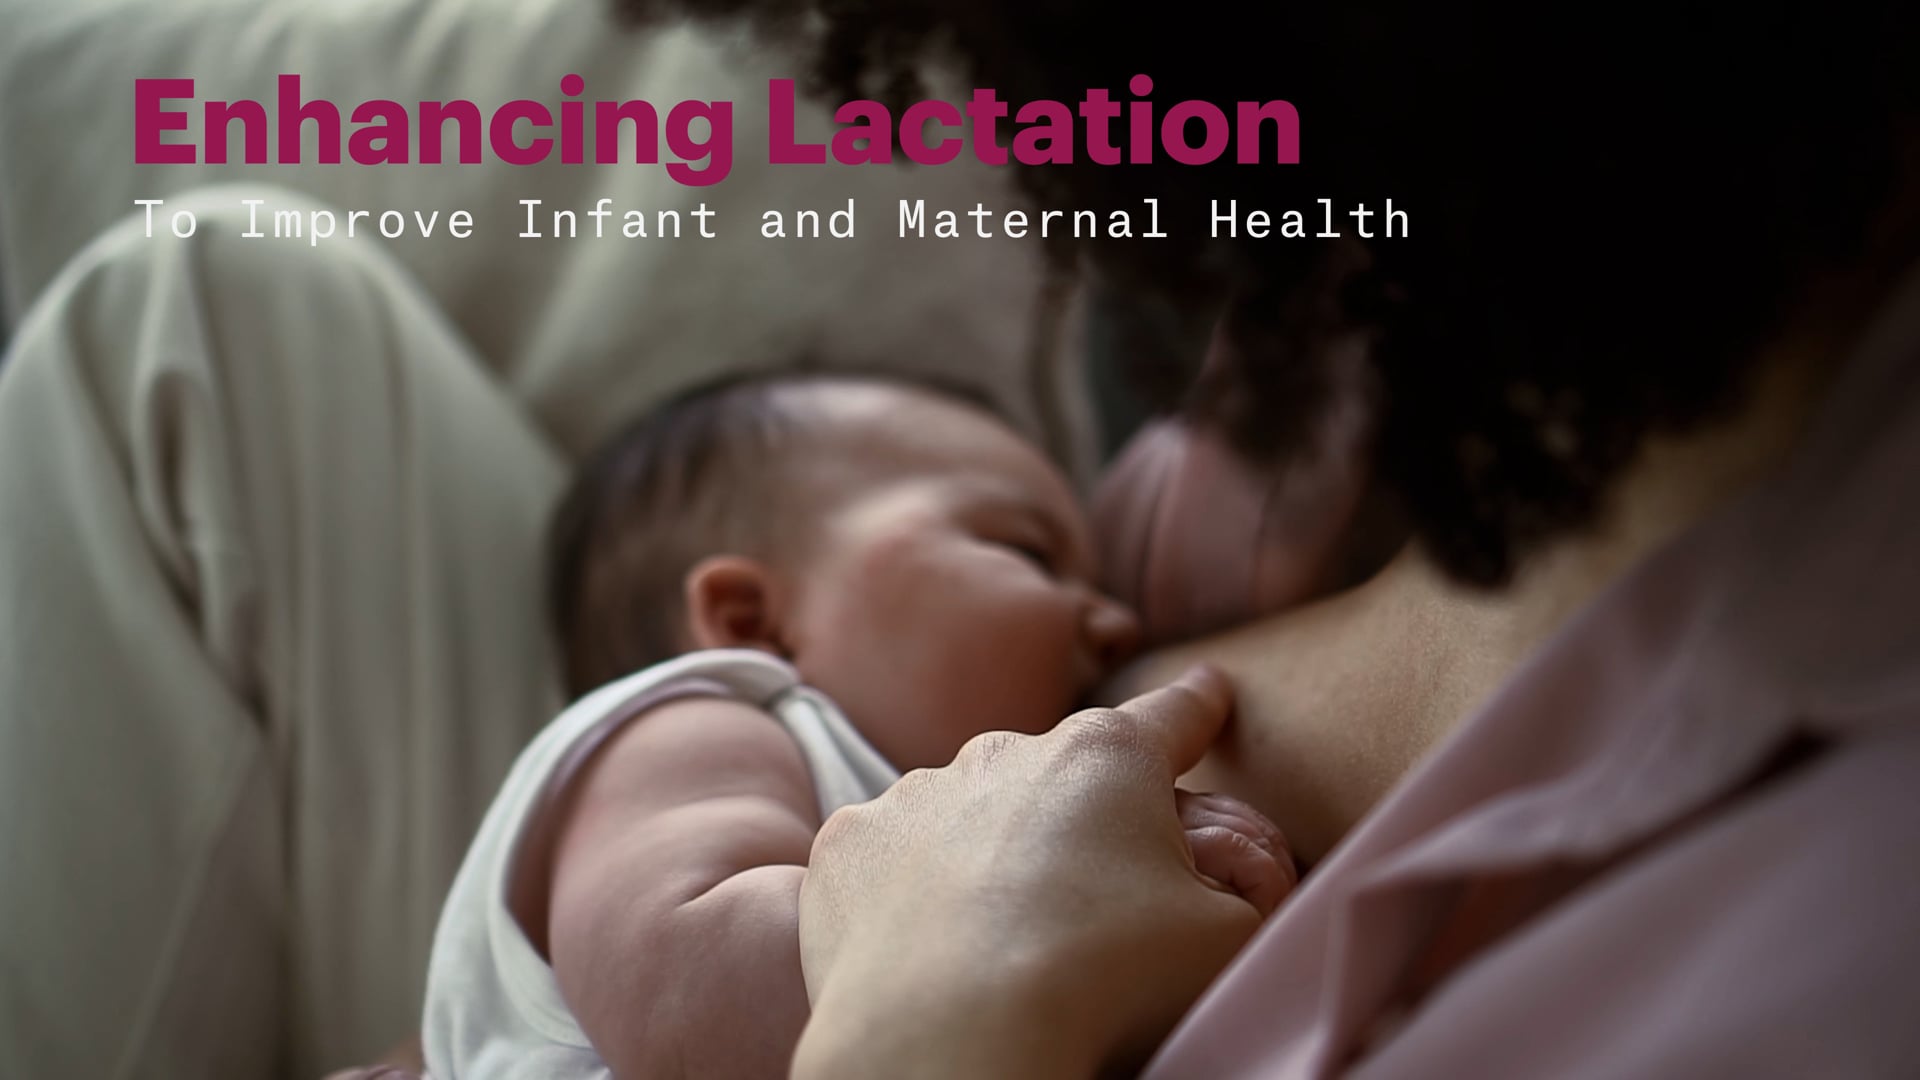 Enhancing Lactation to Improve Infant and Maternal Health